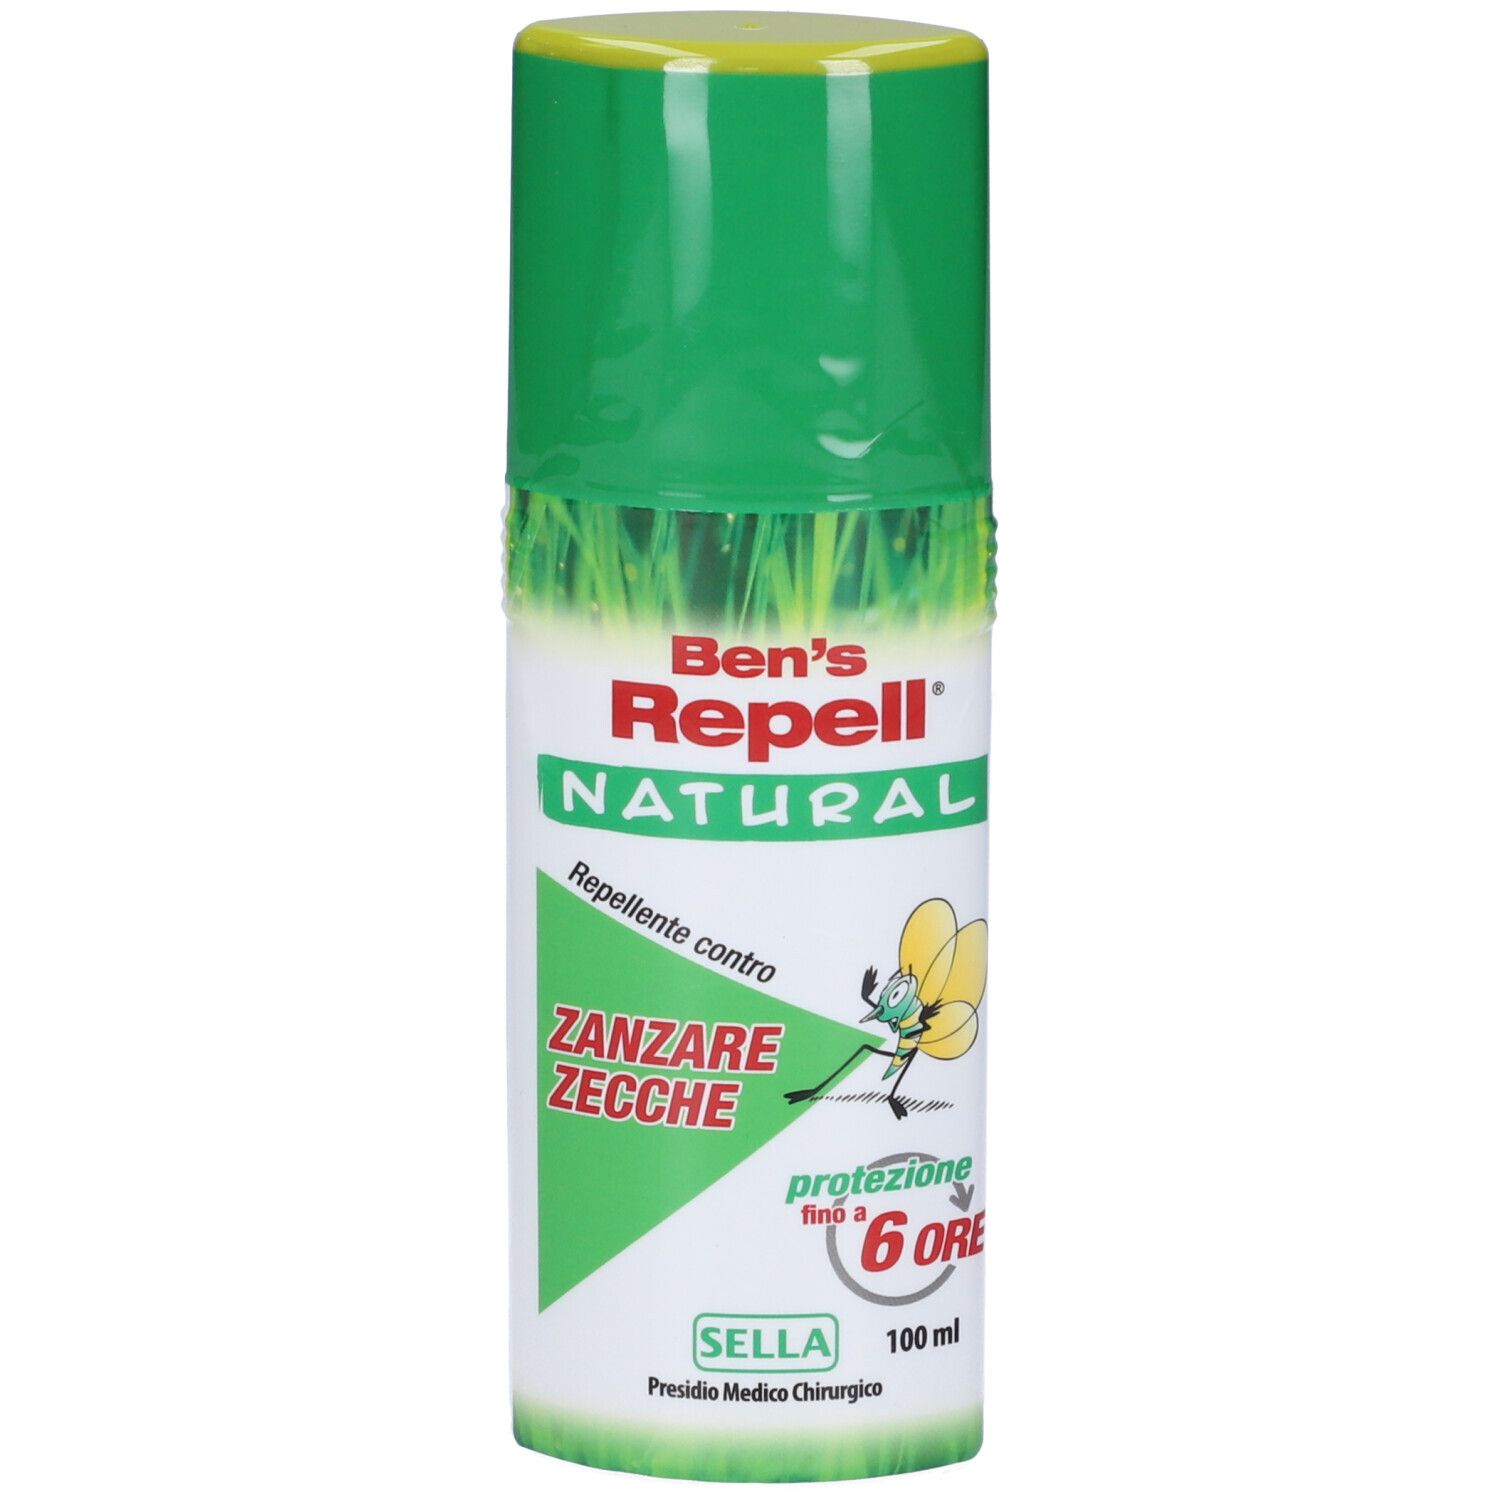 Ben's Repell Natural